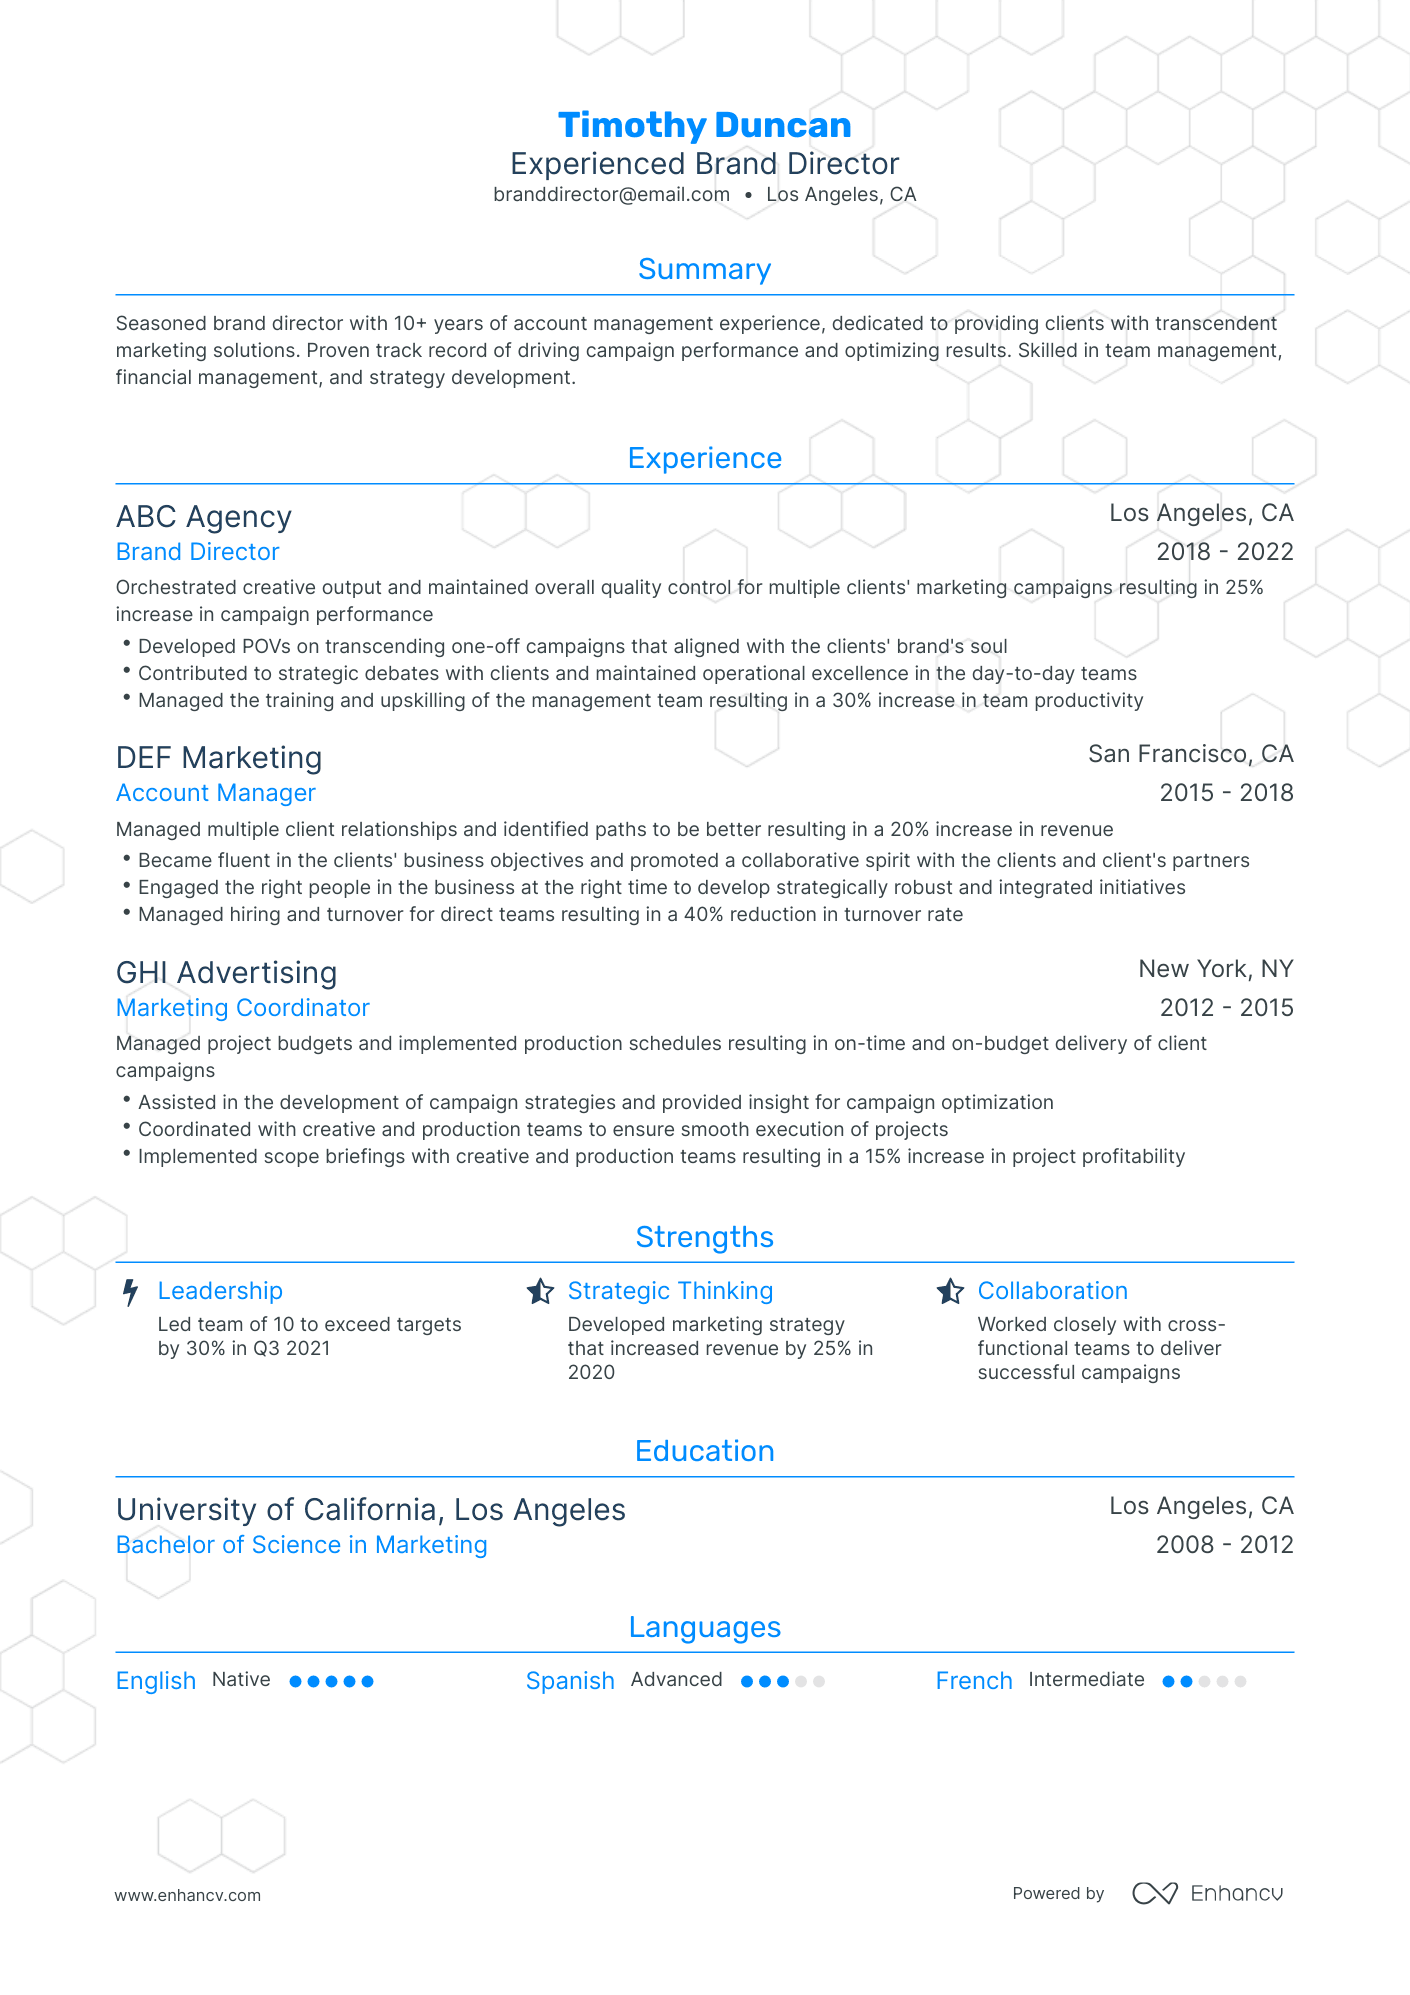 Traditional Brand Director Resume Template